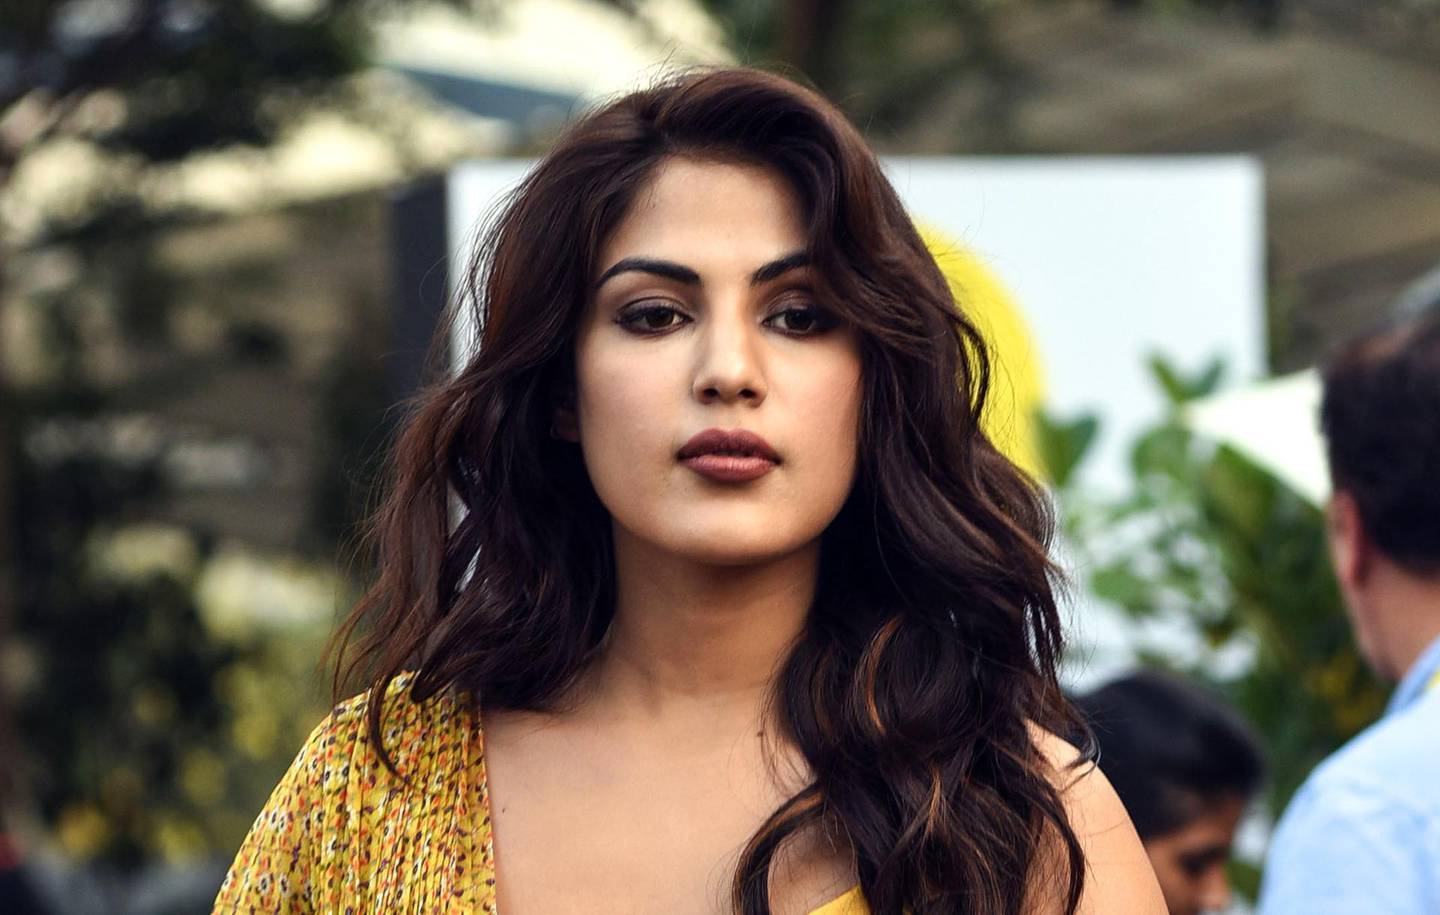 Indian Bollywood actress Rhea Chakraborty poses for photographs at the Lakmé Fashion Week (LFW) Summer Resort 2019, in Mumbai on February 1, 2019. (Photo by Sujit Jaiswal / AFP)